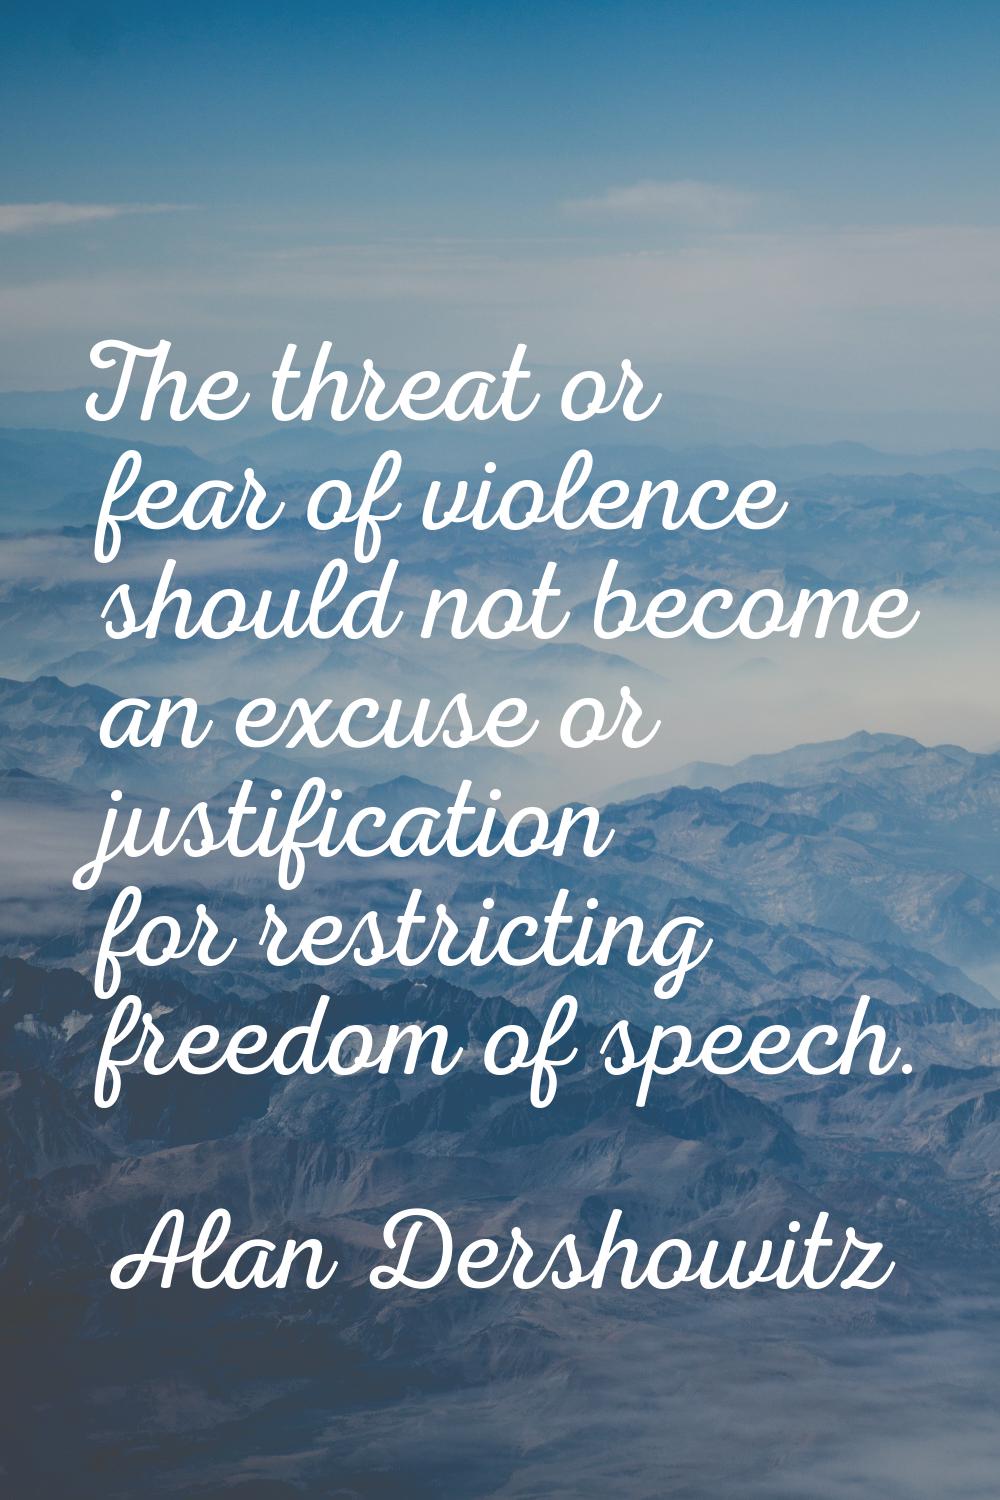 The threat or fear of violence should not become an excuse or justification for restricting freedom